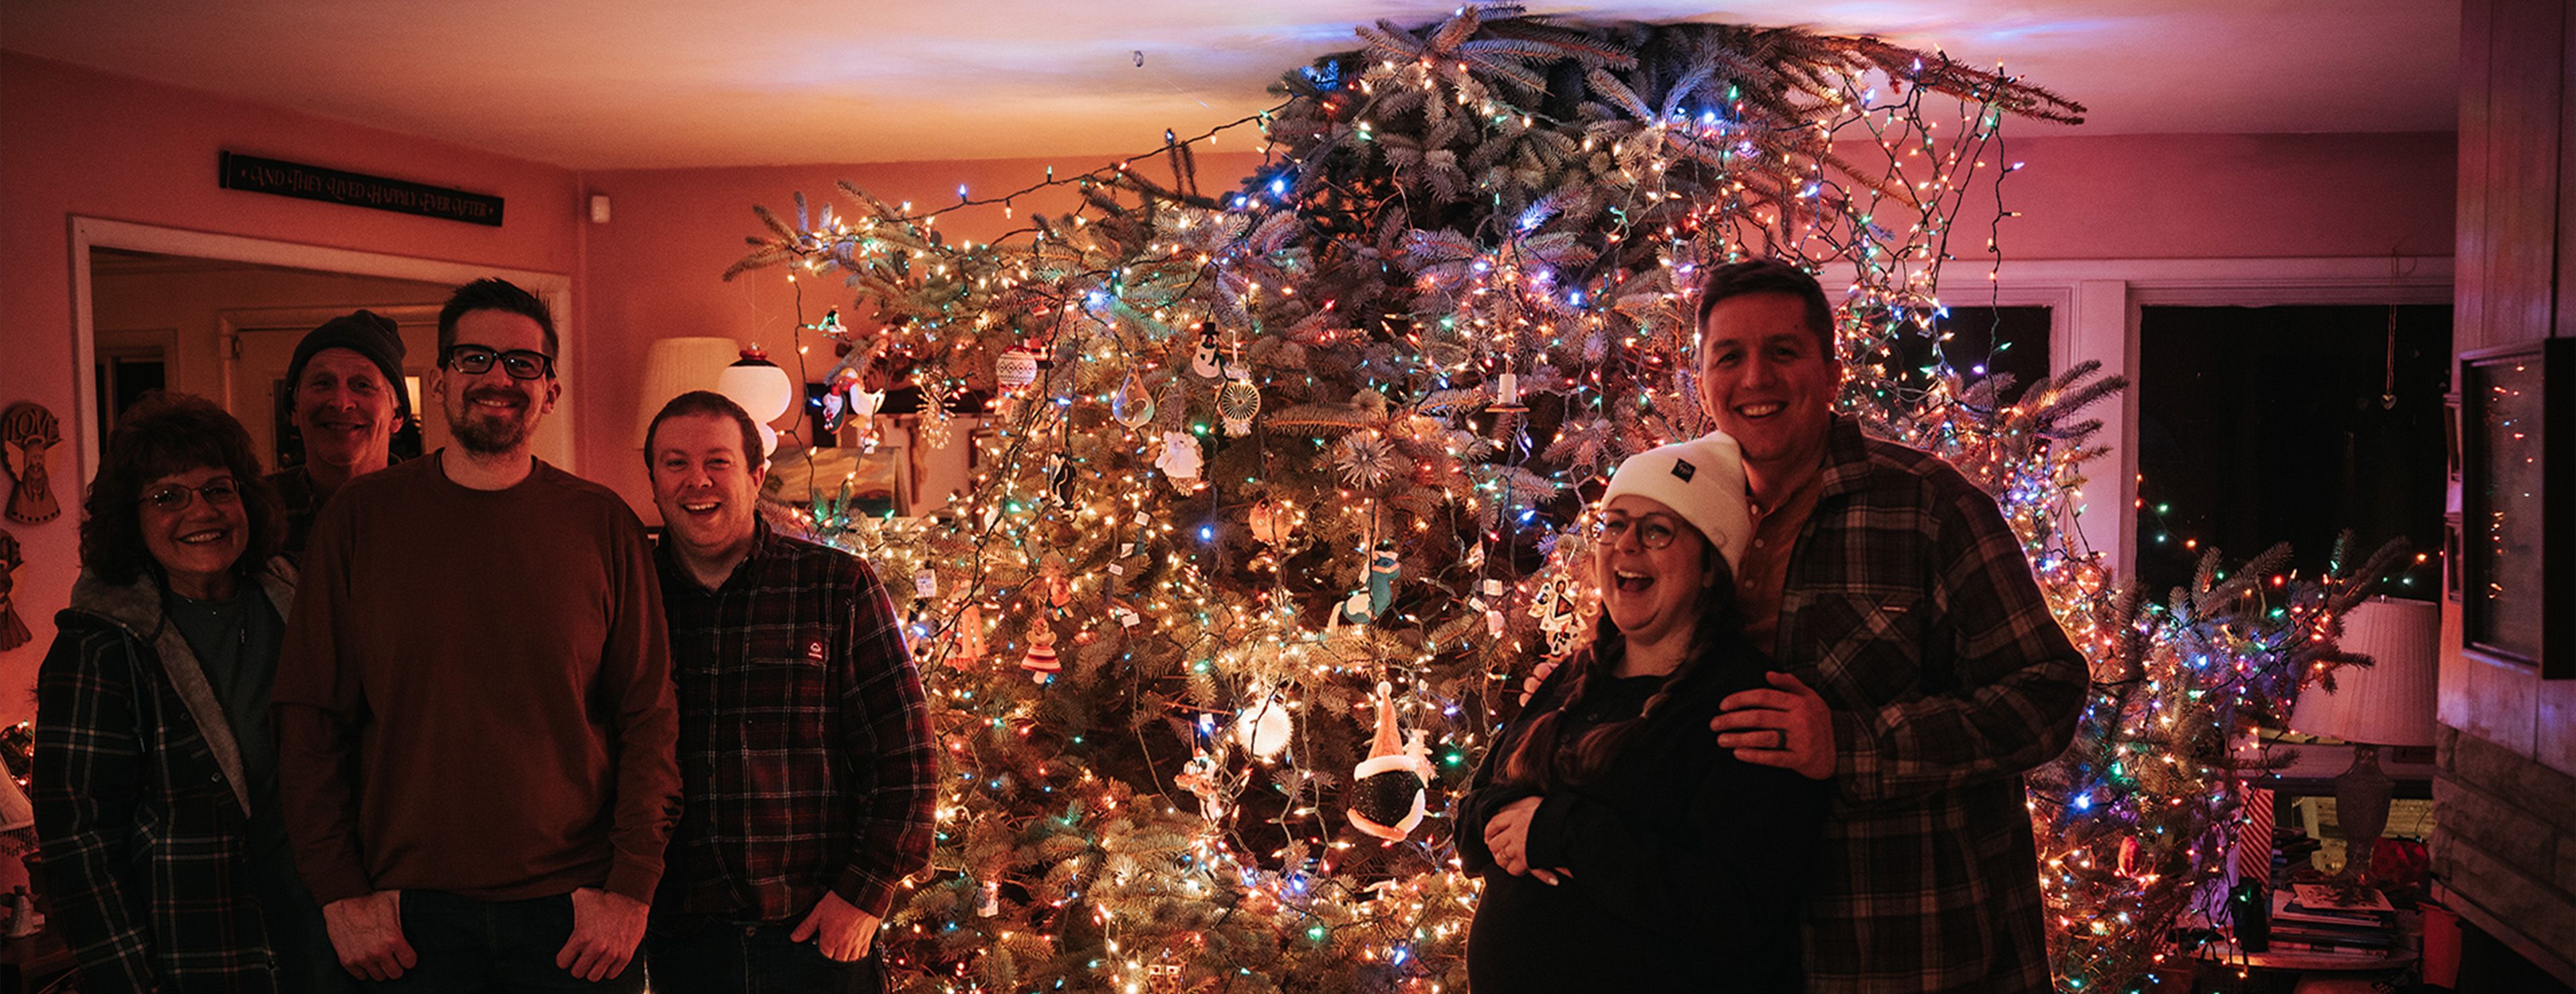 a group of people posing for a picture in front of a christmas tree